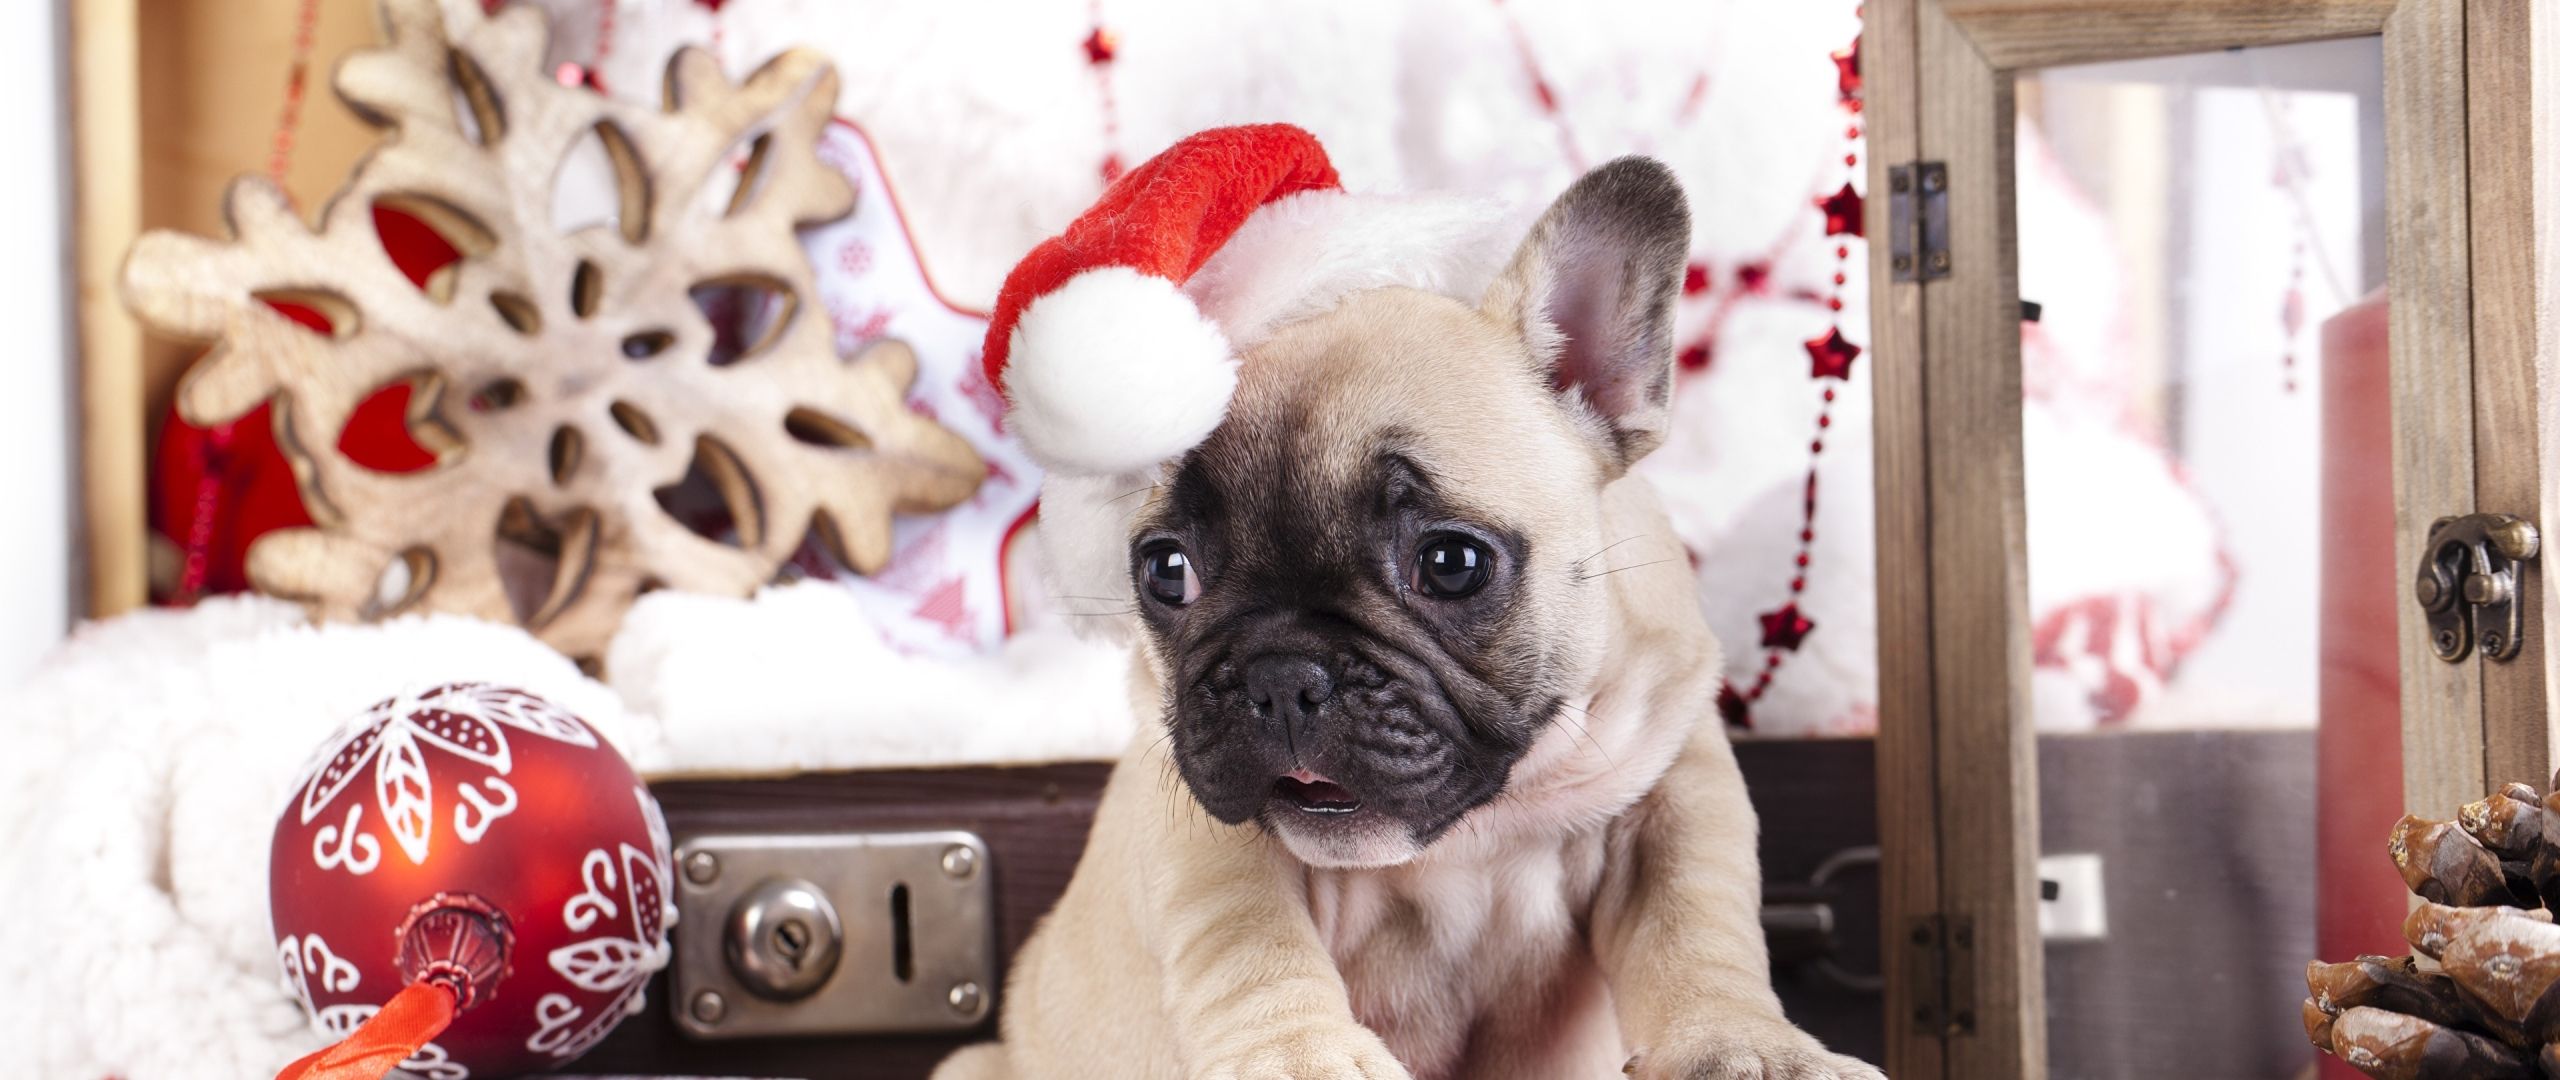 Download puppy, cute animals, Christmas, New Year, 4k Dual Wide display 1080p wallpaper 2560x1080